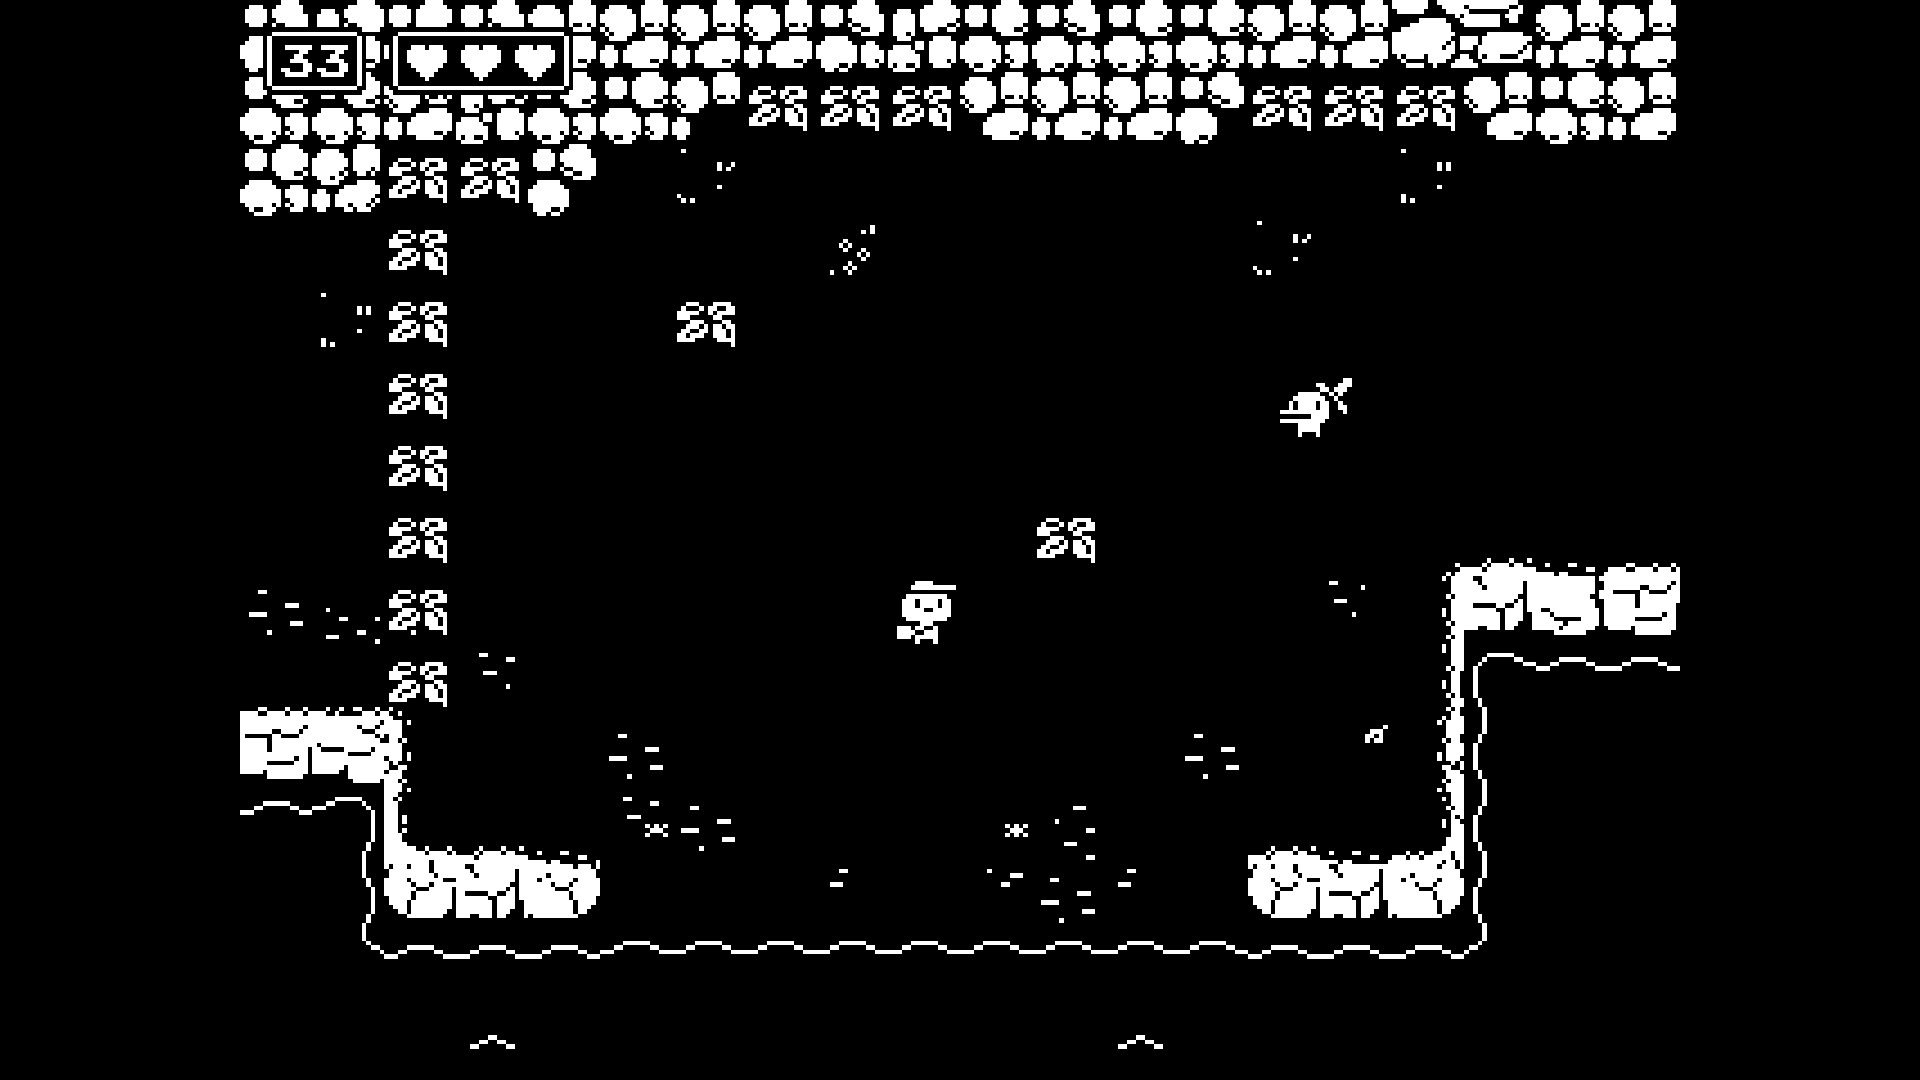 Black and white screenshot depicting a river bank, the protagonist with a sword and a mail delivery person.